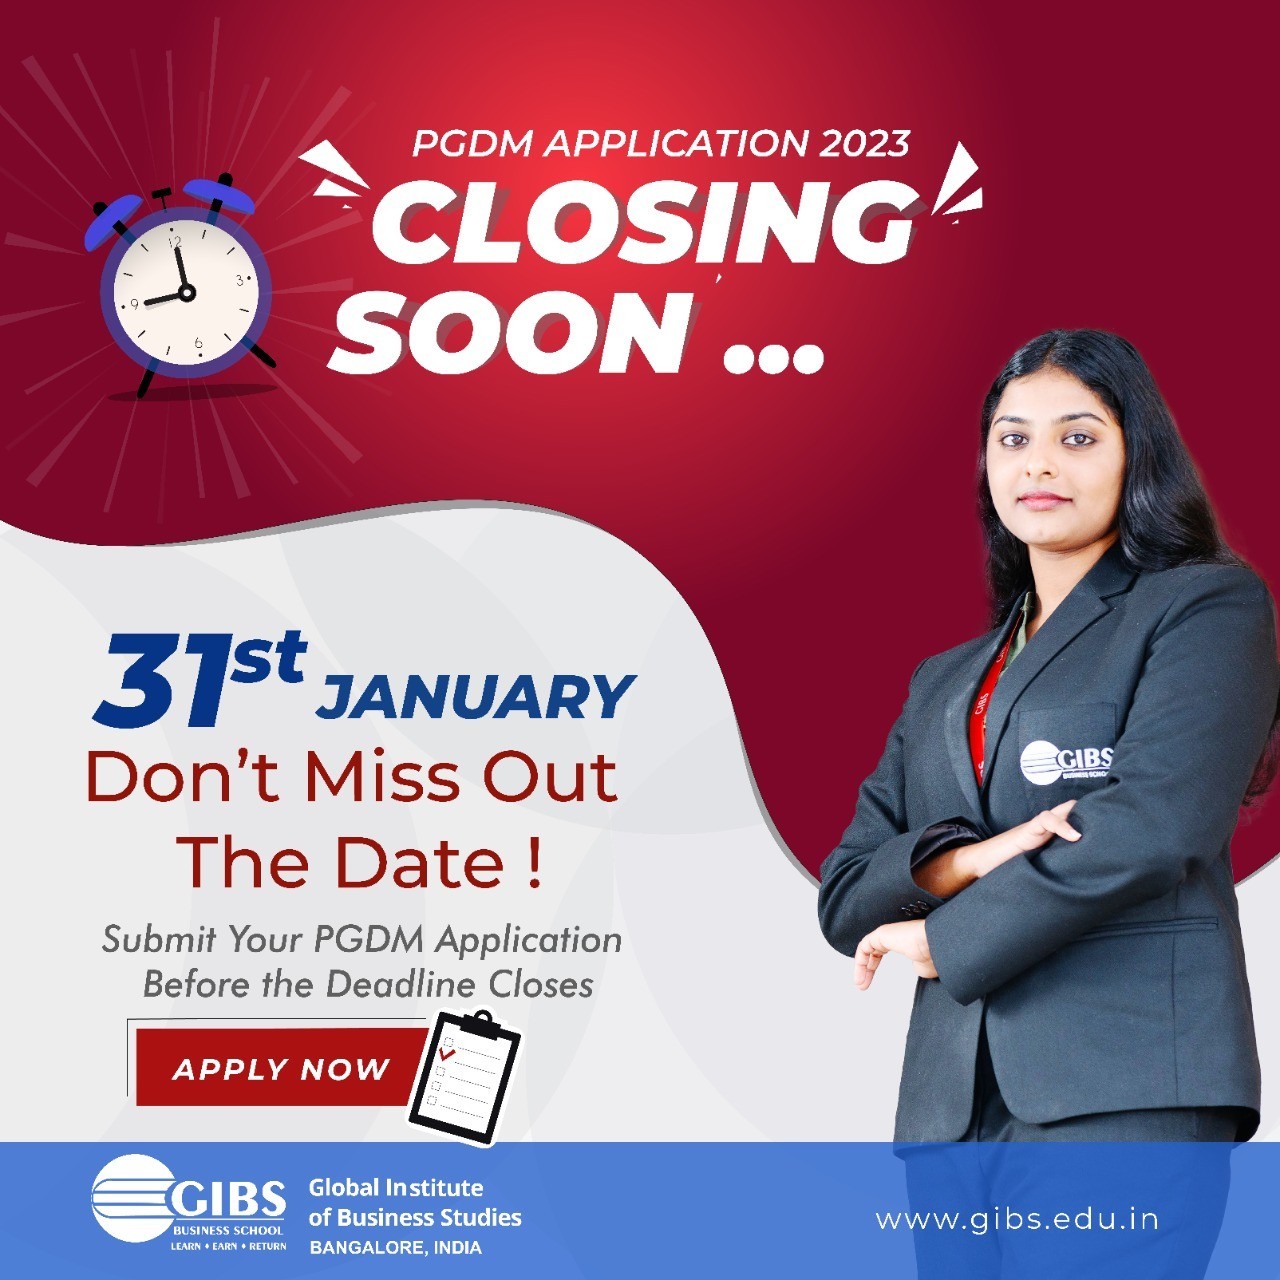  GIBS Bangalore: The Top Choice for BBA/PGDM Admissions - Apply Today | Top BSchool in Bangalore 